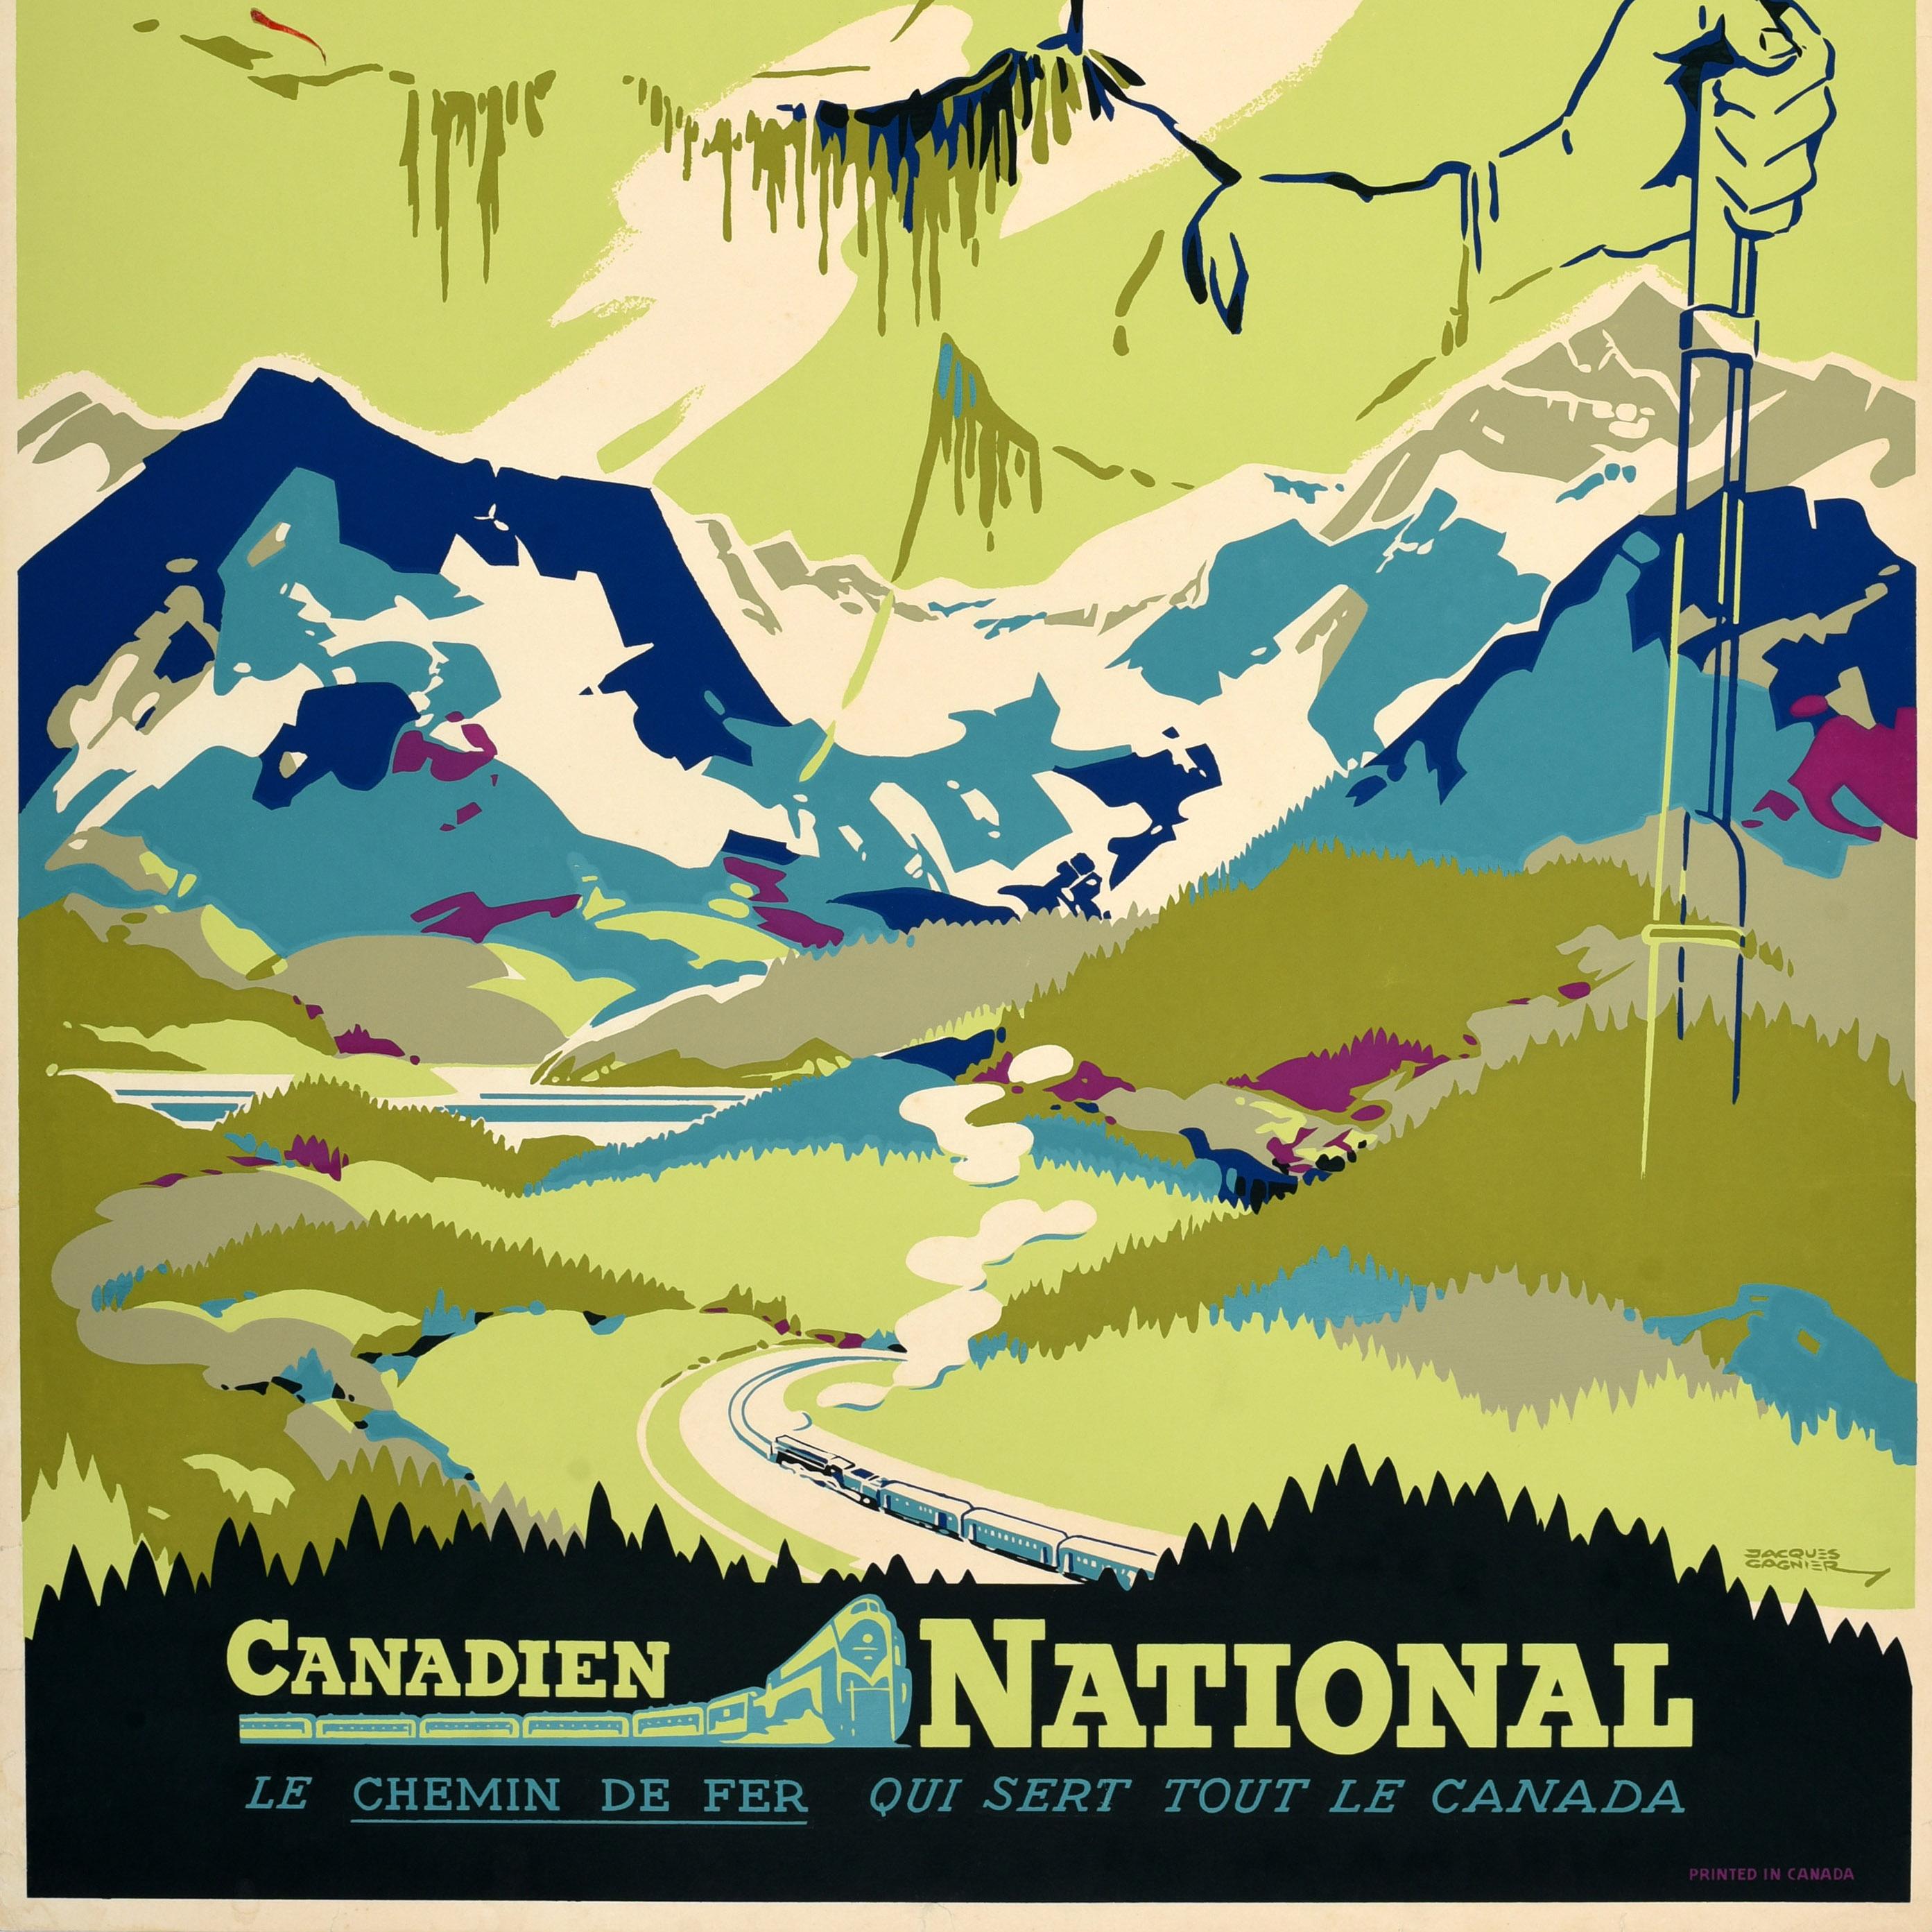 Original vintage travel poster - Explorez le Canada Canadien National le Chemin de Fer qui sert tout le Canada / Explore Canada the Canadian National Railways serves all of Canada - featuring a great design depicting an outline of a bearded man in a